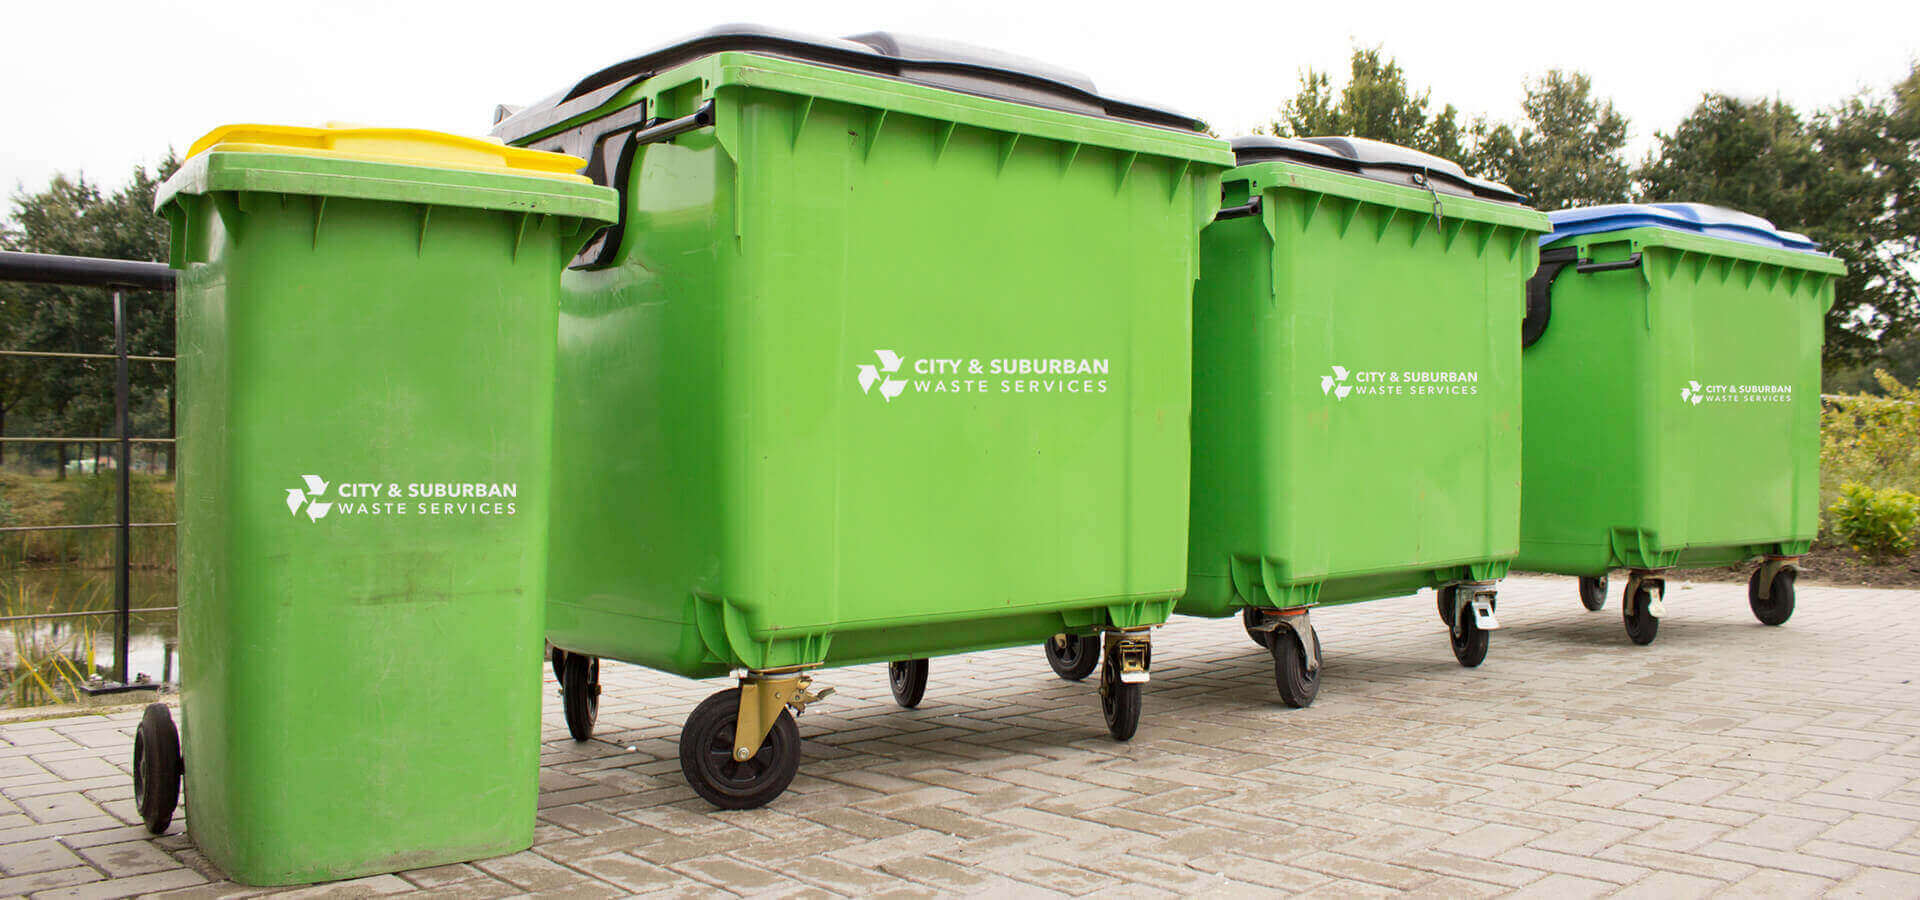 Business waste recycling company